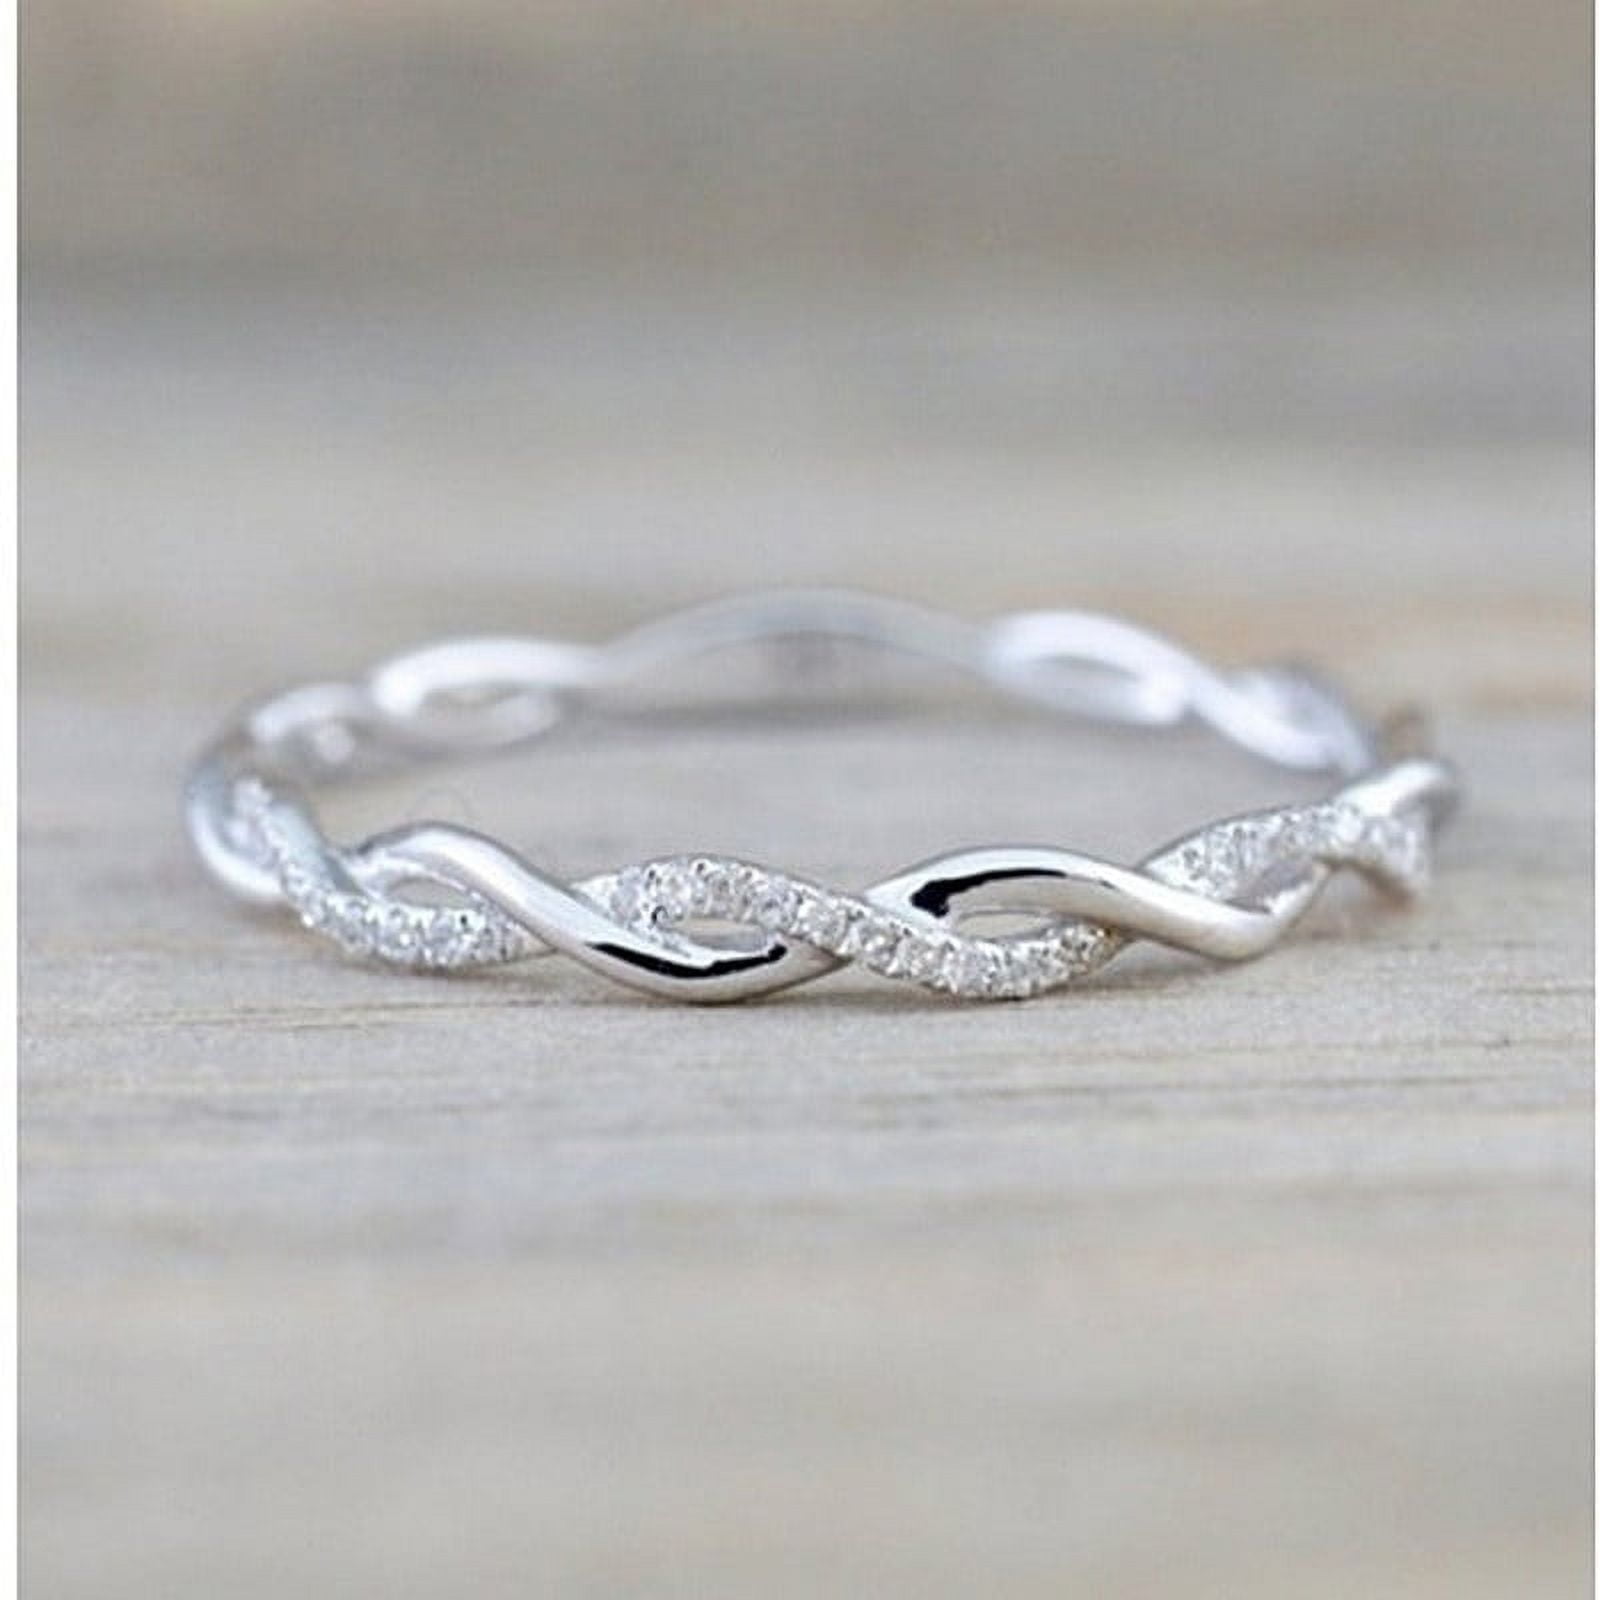 Twist band - a natural wedding band inspired by nature – The Raw Stone